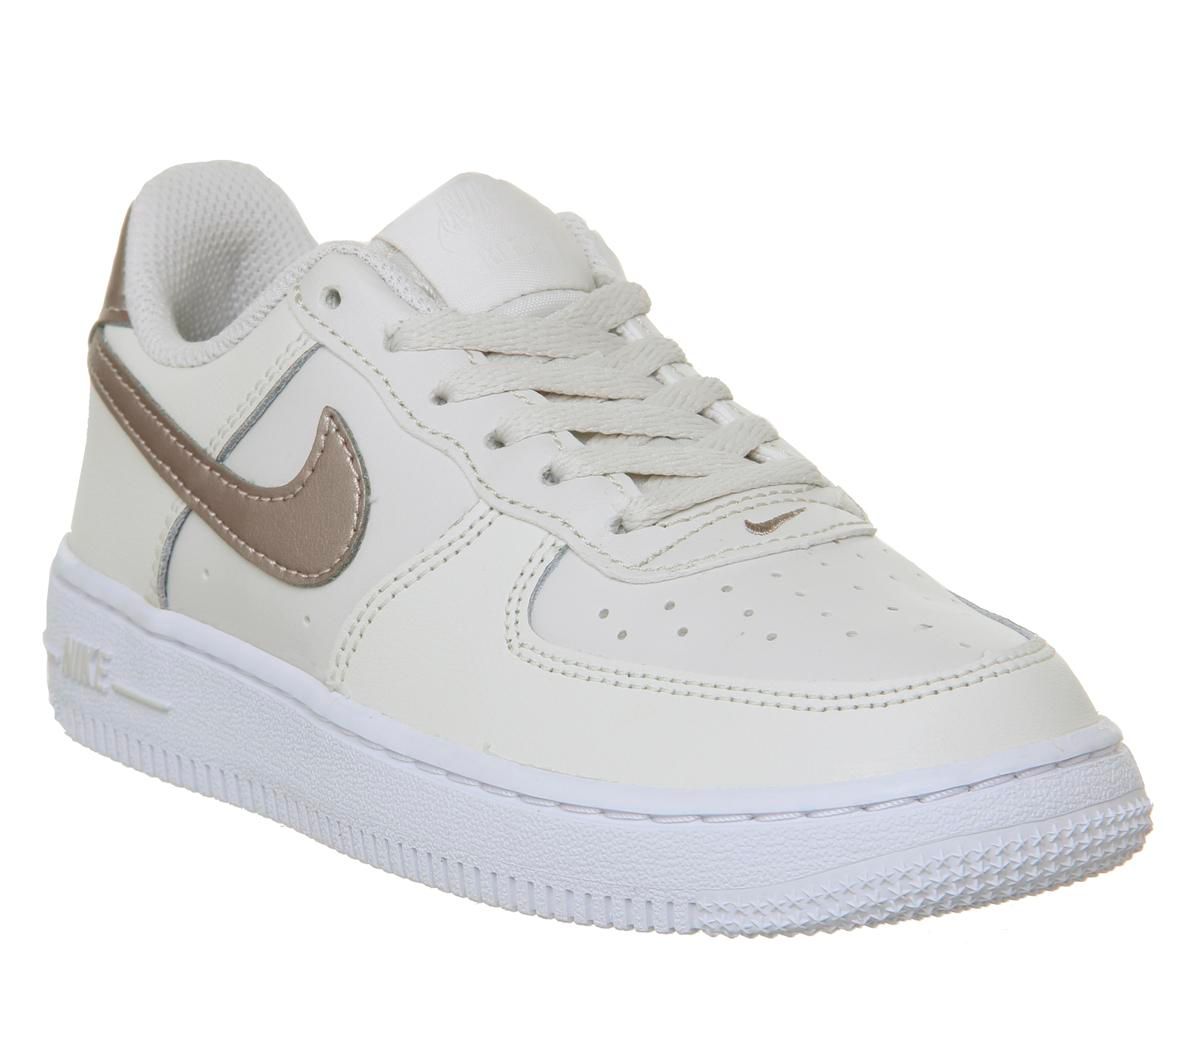 white air force 1 office